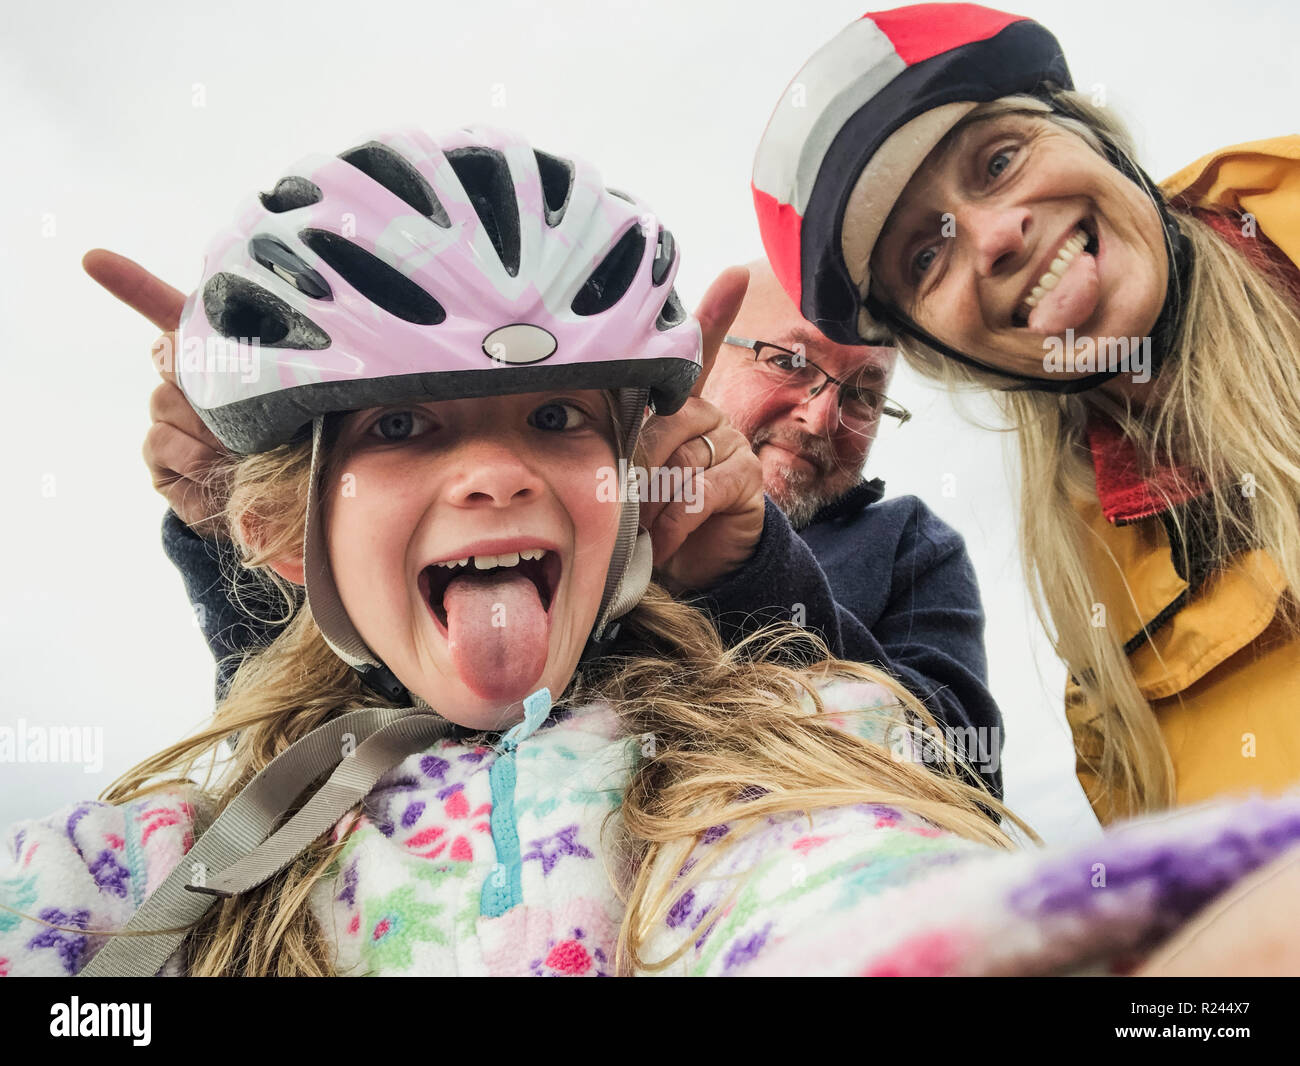 A close-up selfie of a happy family with one child, they are on an outdoor bikeride and pulling silly faces. Stock Photo